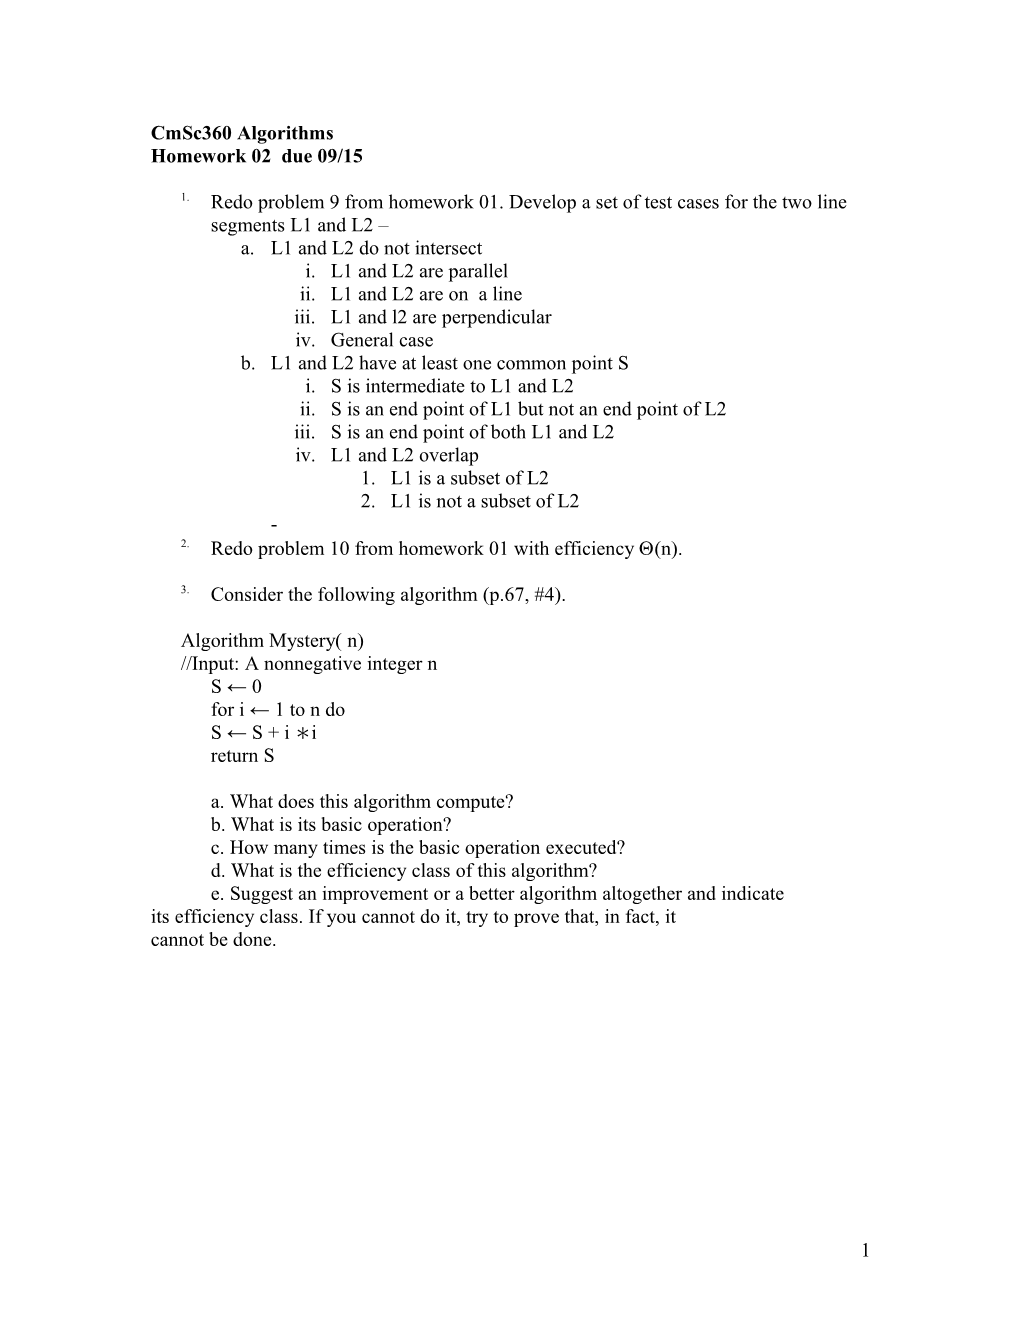 Redo Problem 9 from Homework 01. Develop a Set of Test Cases for the Two Line Segments